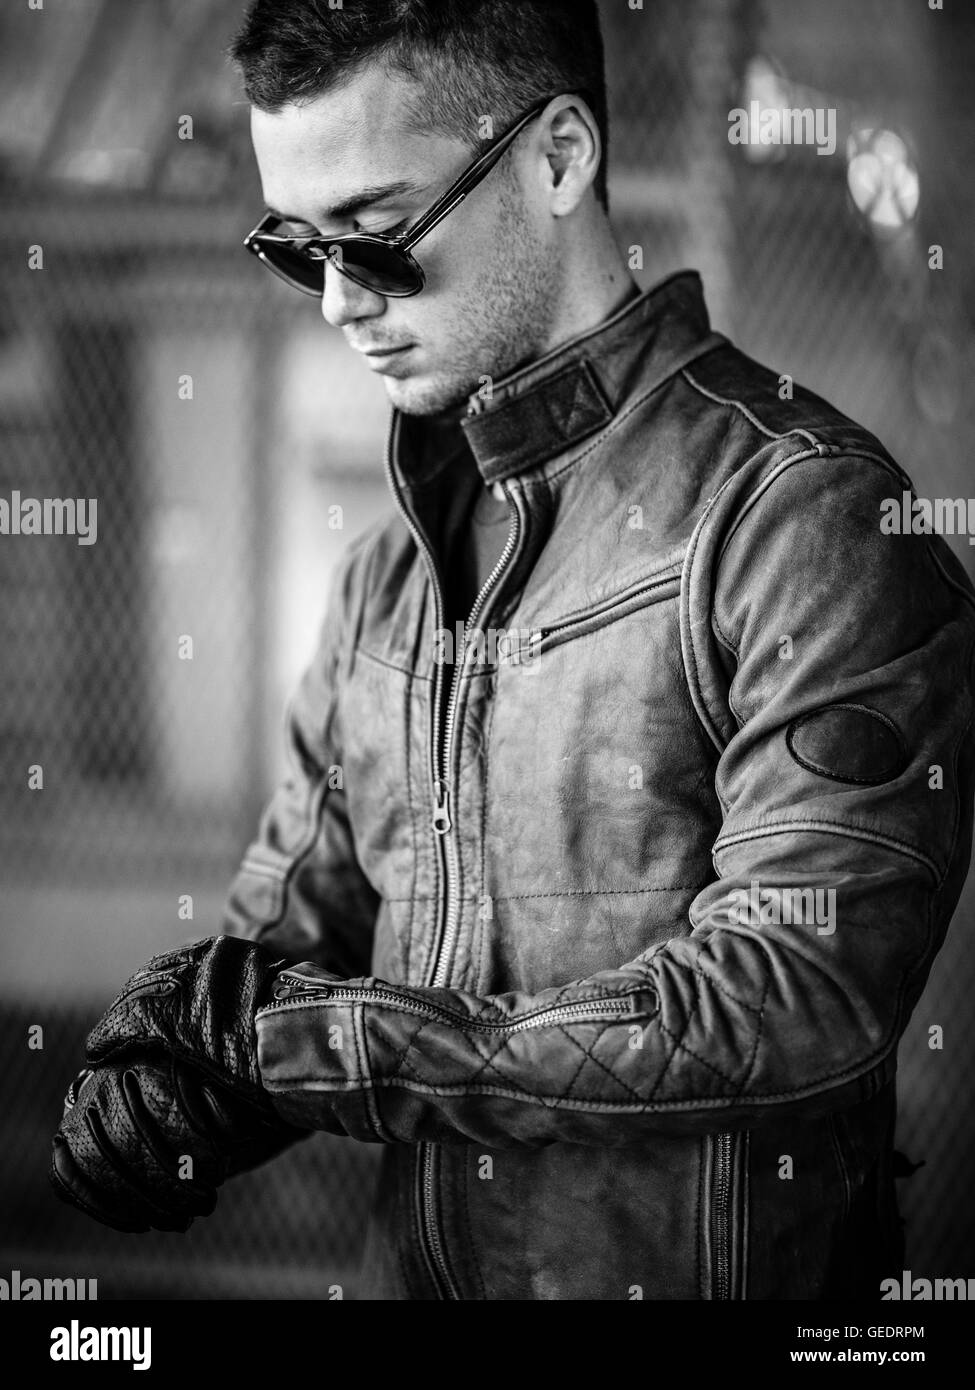 Portrait of Young Adult Man Wearing Sunglasses and Leather Jacket Stock Photo